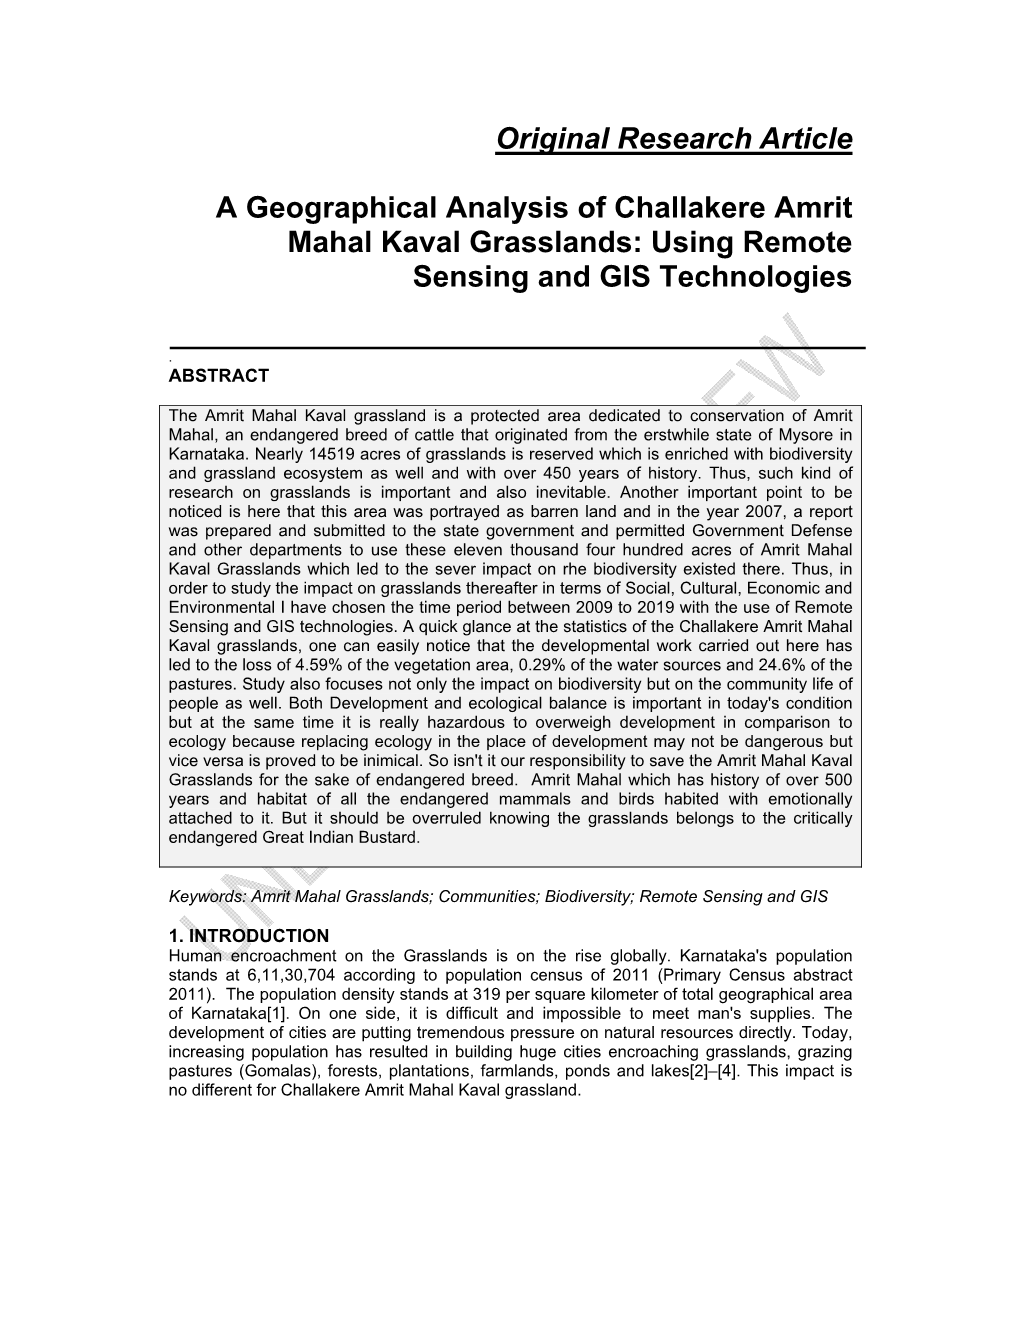 Original Research Article a Geographical Analysis Of